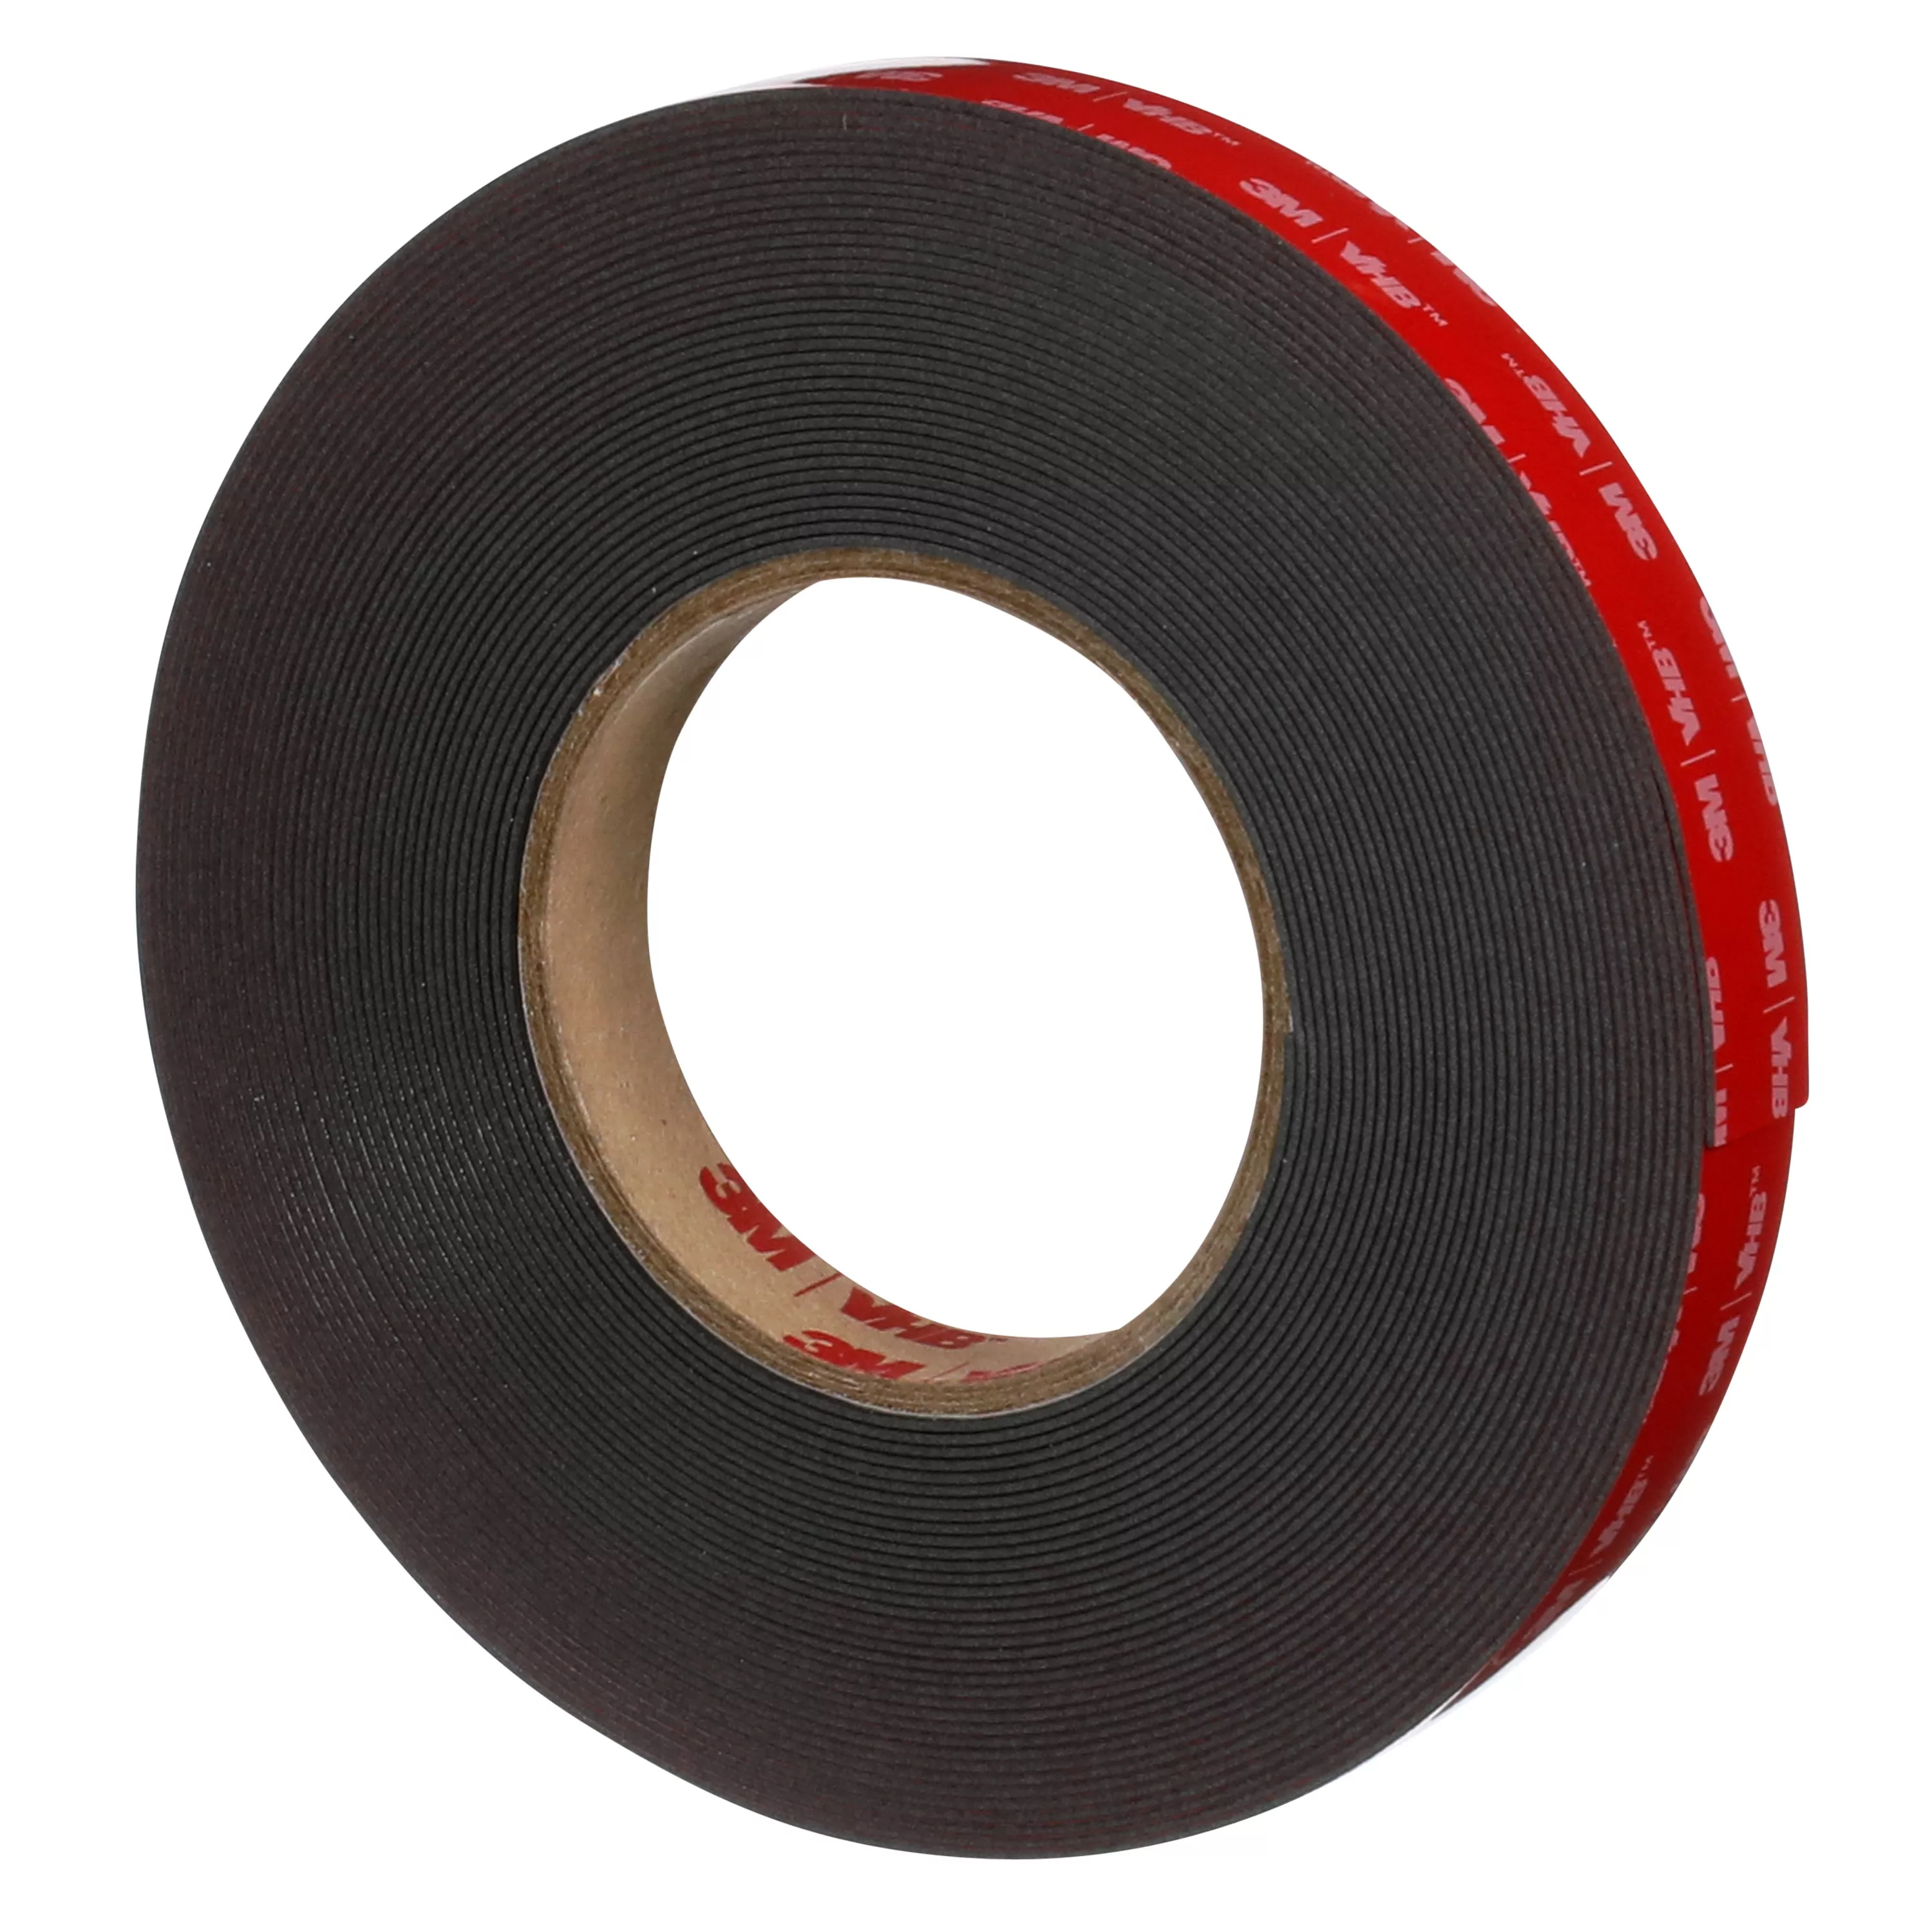 Product Number 5952 | 3M™ VHB™ Heavy Duty Mounting Tape 5952